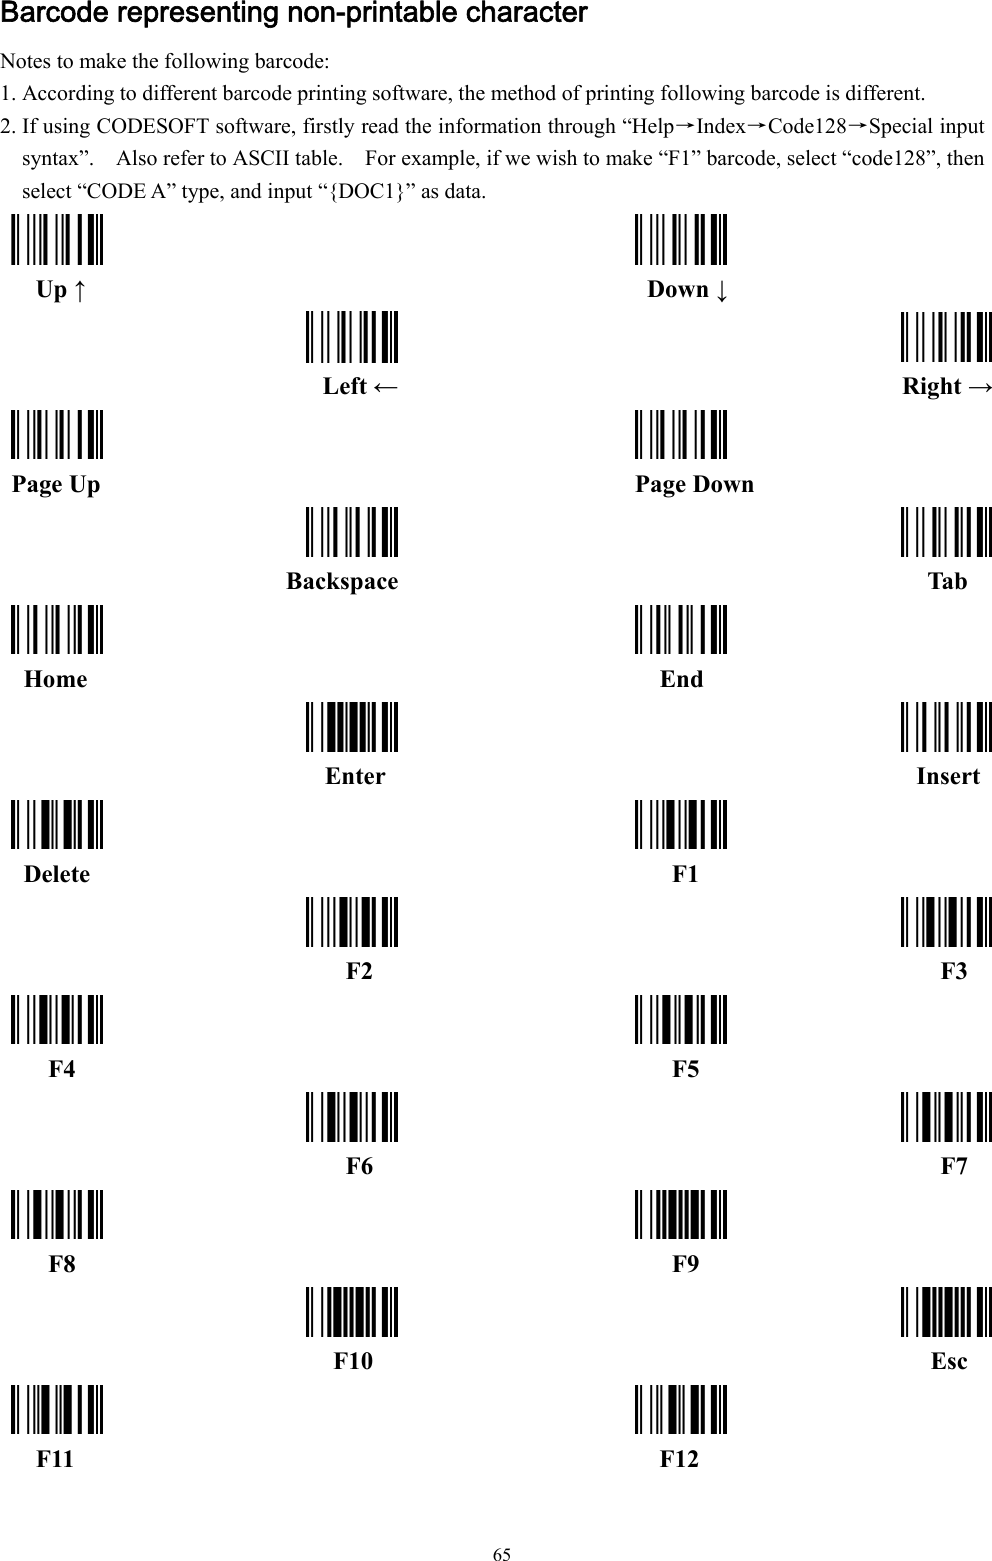  65 Barcode representing non-printable character  Notes to make the following barcode: 1. According to different barcode printing software, the method of printing following barcode is different.     2. If using CODESOFT software, firstly read the information through “Help→Index→Code128→Special input syntax”.    Also refer to ASCII table.    For example, if we wish to make “F1” barcode, select “code128”, then select “CODE A” type, and input “{DOC1}” as data.    Up ↑   Down ↓ Left ← Right → Page Up   Page Down Backspace Tab  Home   End Enter  Insert  Delete   F1 F2  F3  F4   F5 F6  F7  F8   F9 F10  Esc  F11   F12 